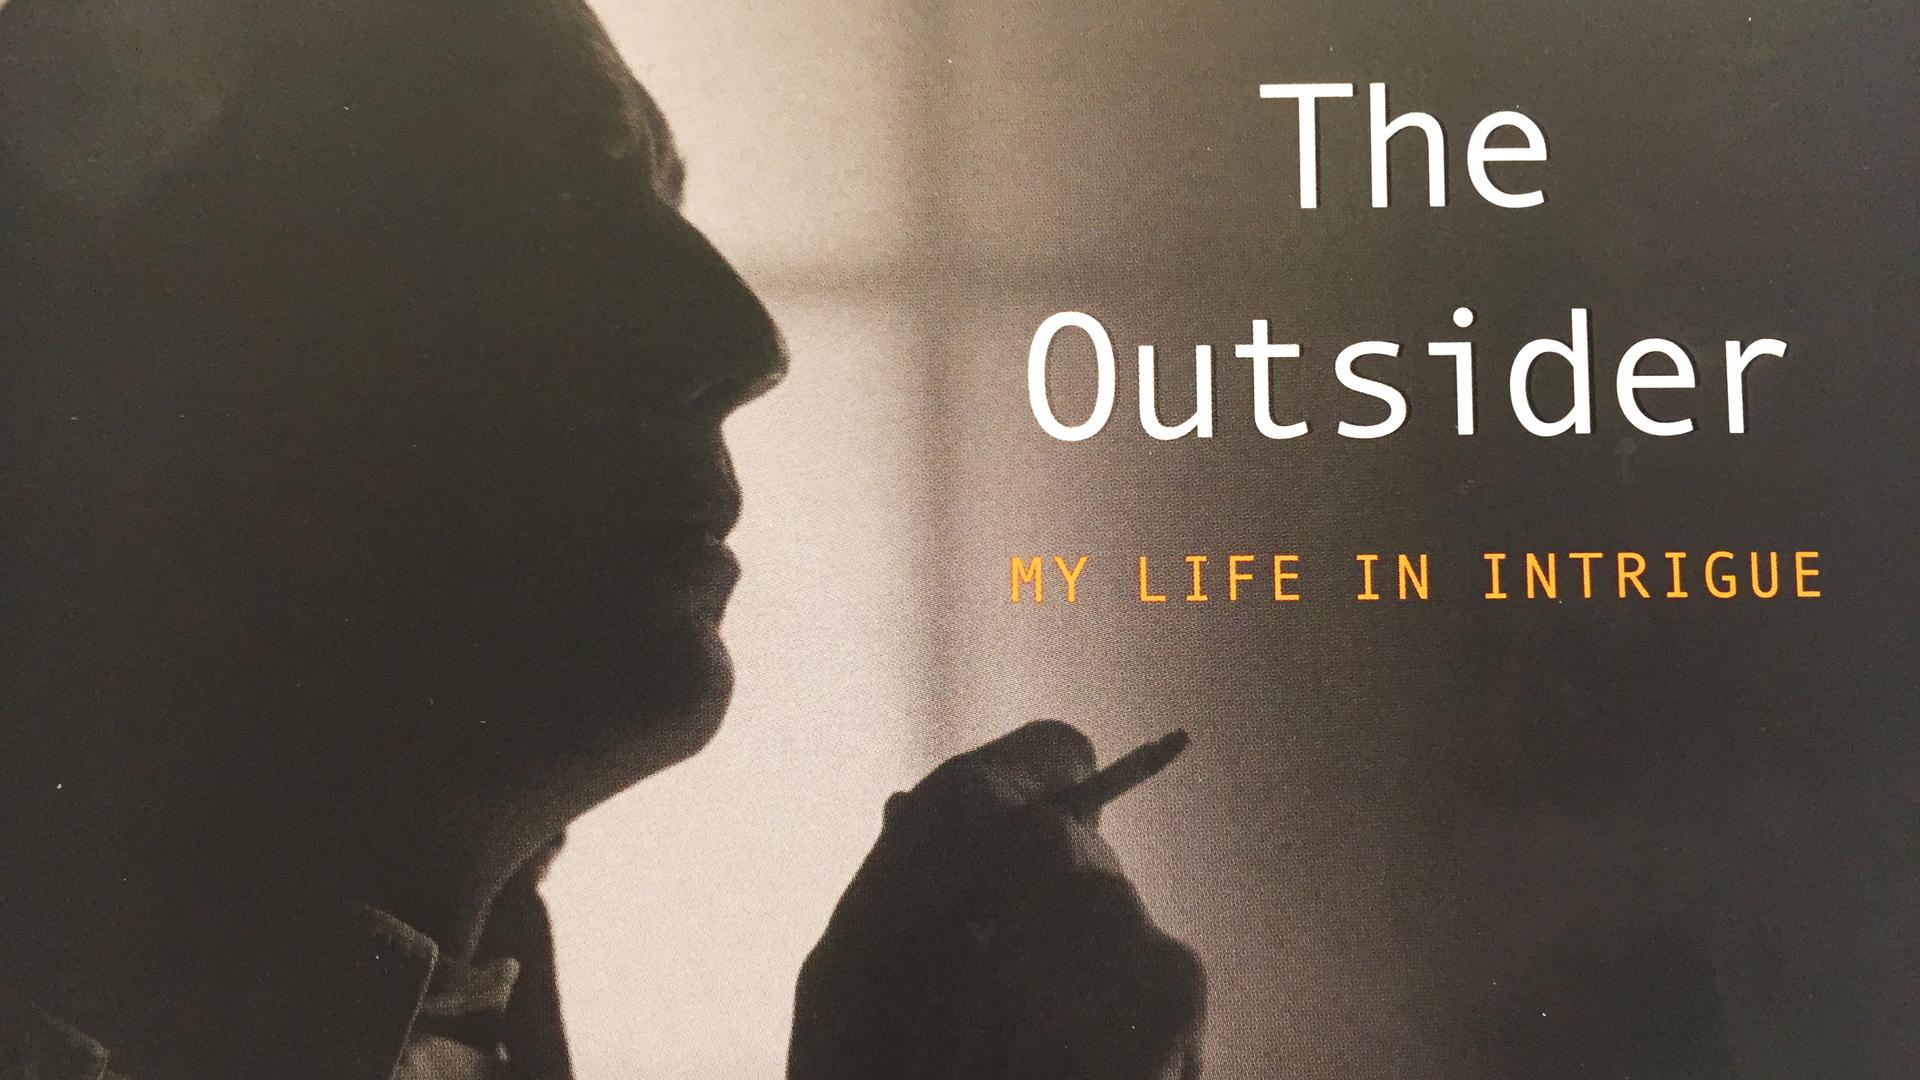 Frederick Forsyth leaves the fiction world behind to tell the tale of his own life in the new autobiography, "Outsider: My Life in Intrigue."